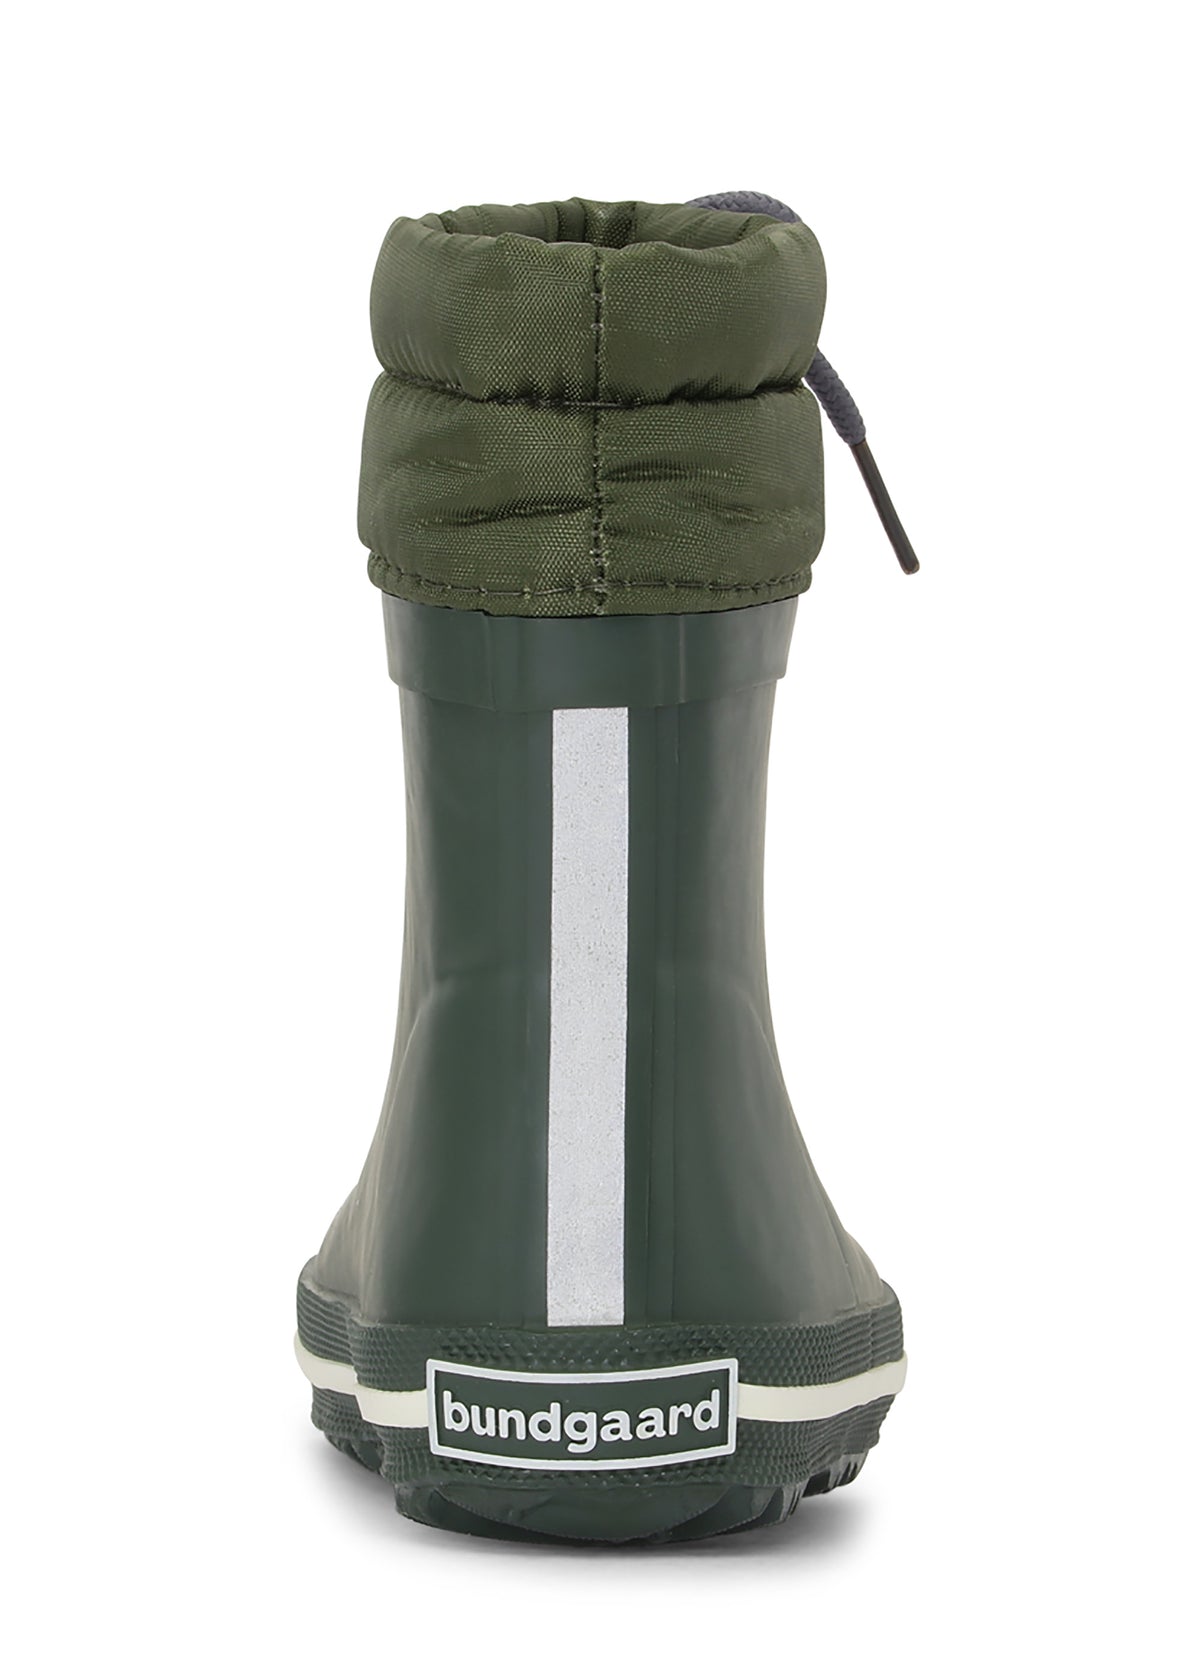 Rubber boots with a warm lining - dark green, short shaft, drawstrings, Cirro Low Warm